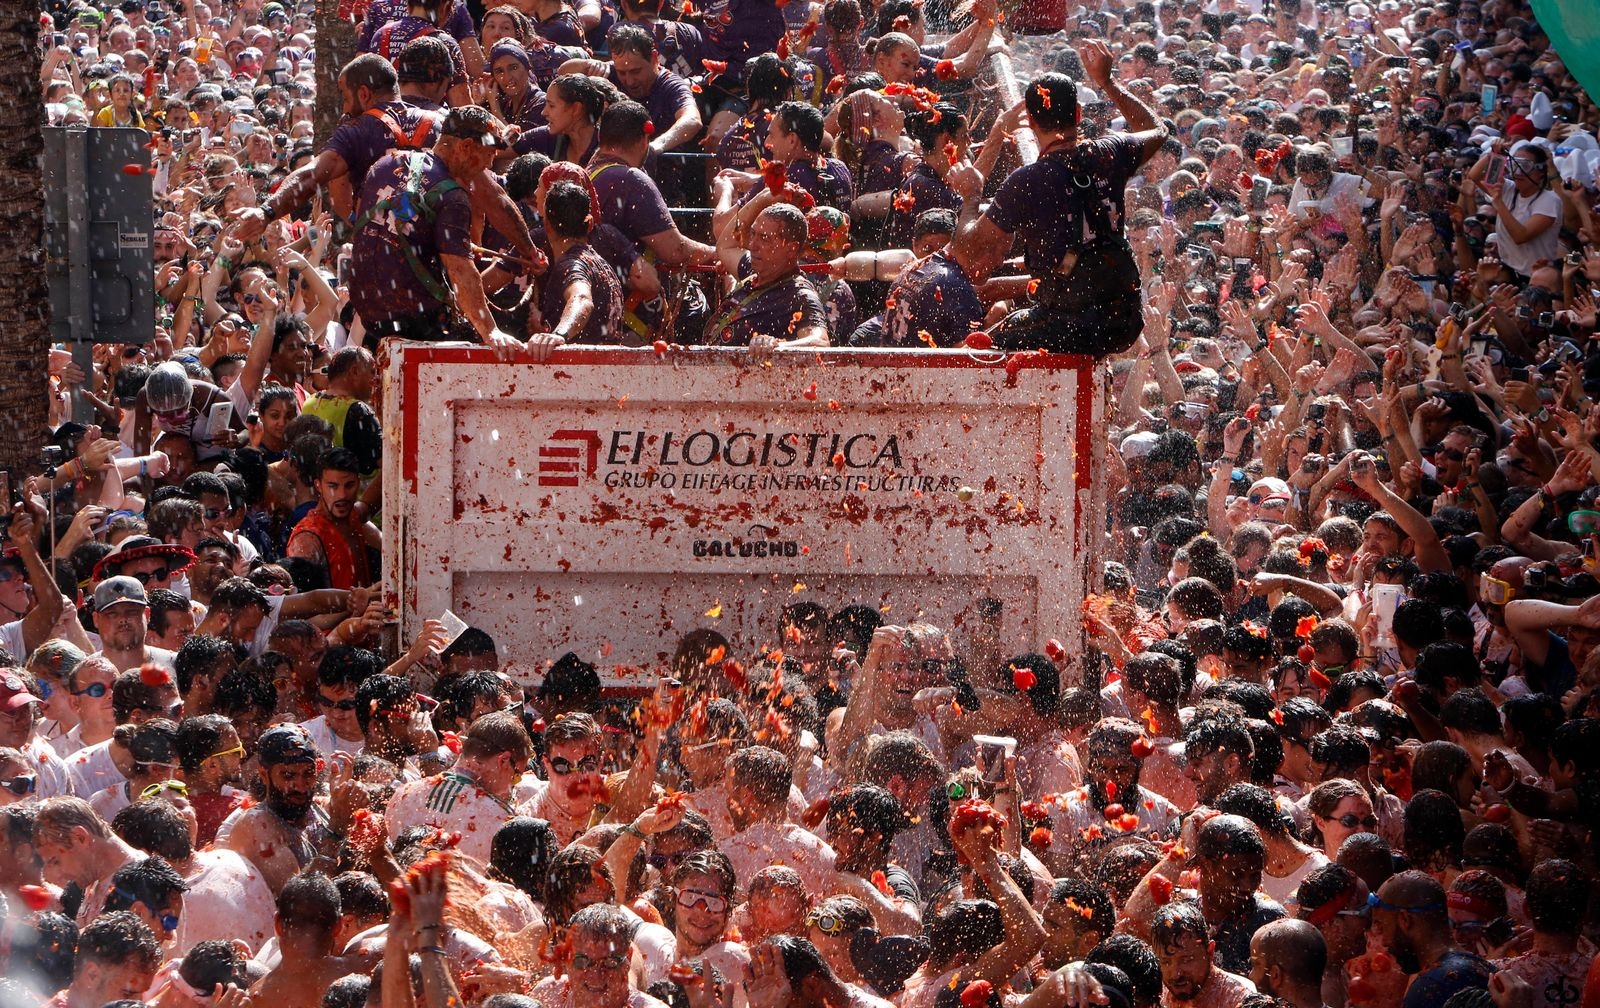 Revelers throw tomatoes at each other, during the annual "Tomatina", tomato fight fiesta, in the village of Bunol, 50 kilometers outside Valencia, Spain, Wednesday, Aug. 29, 2018. At the annual "Tomatina" battle, that has become a major tourist attraction, trucks dumped 160 tons of tomatoes for some 20,000 participants, many from abroad, to throw during the hour-long Wednesday morning festivities. (AP Photo/Alberto Saiz)